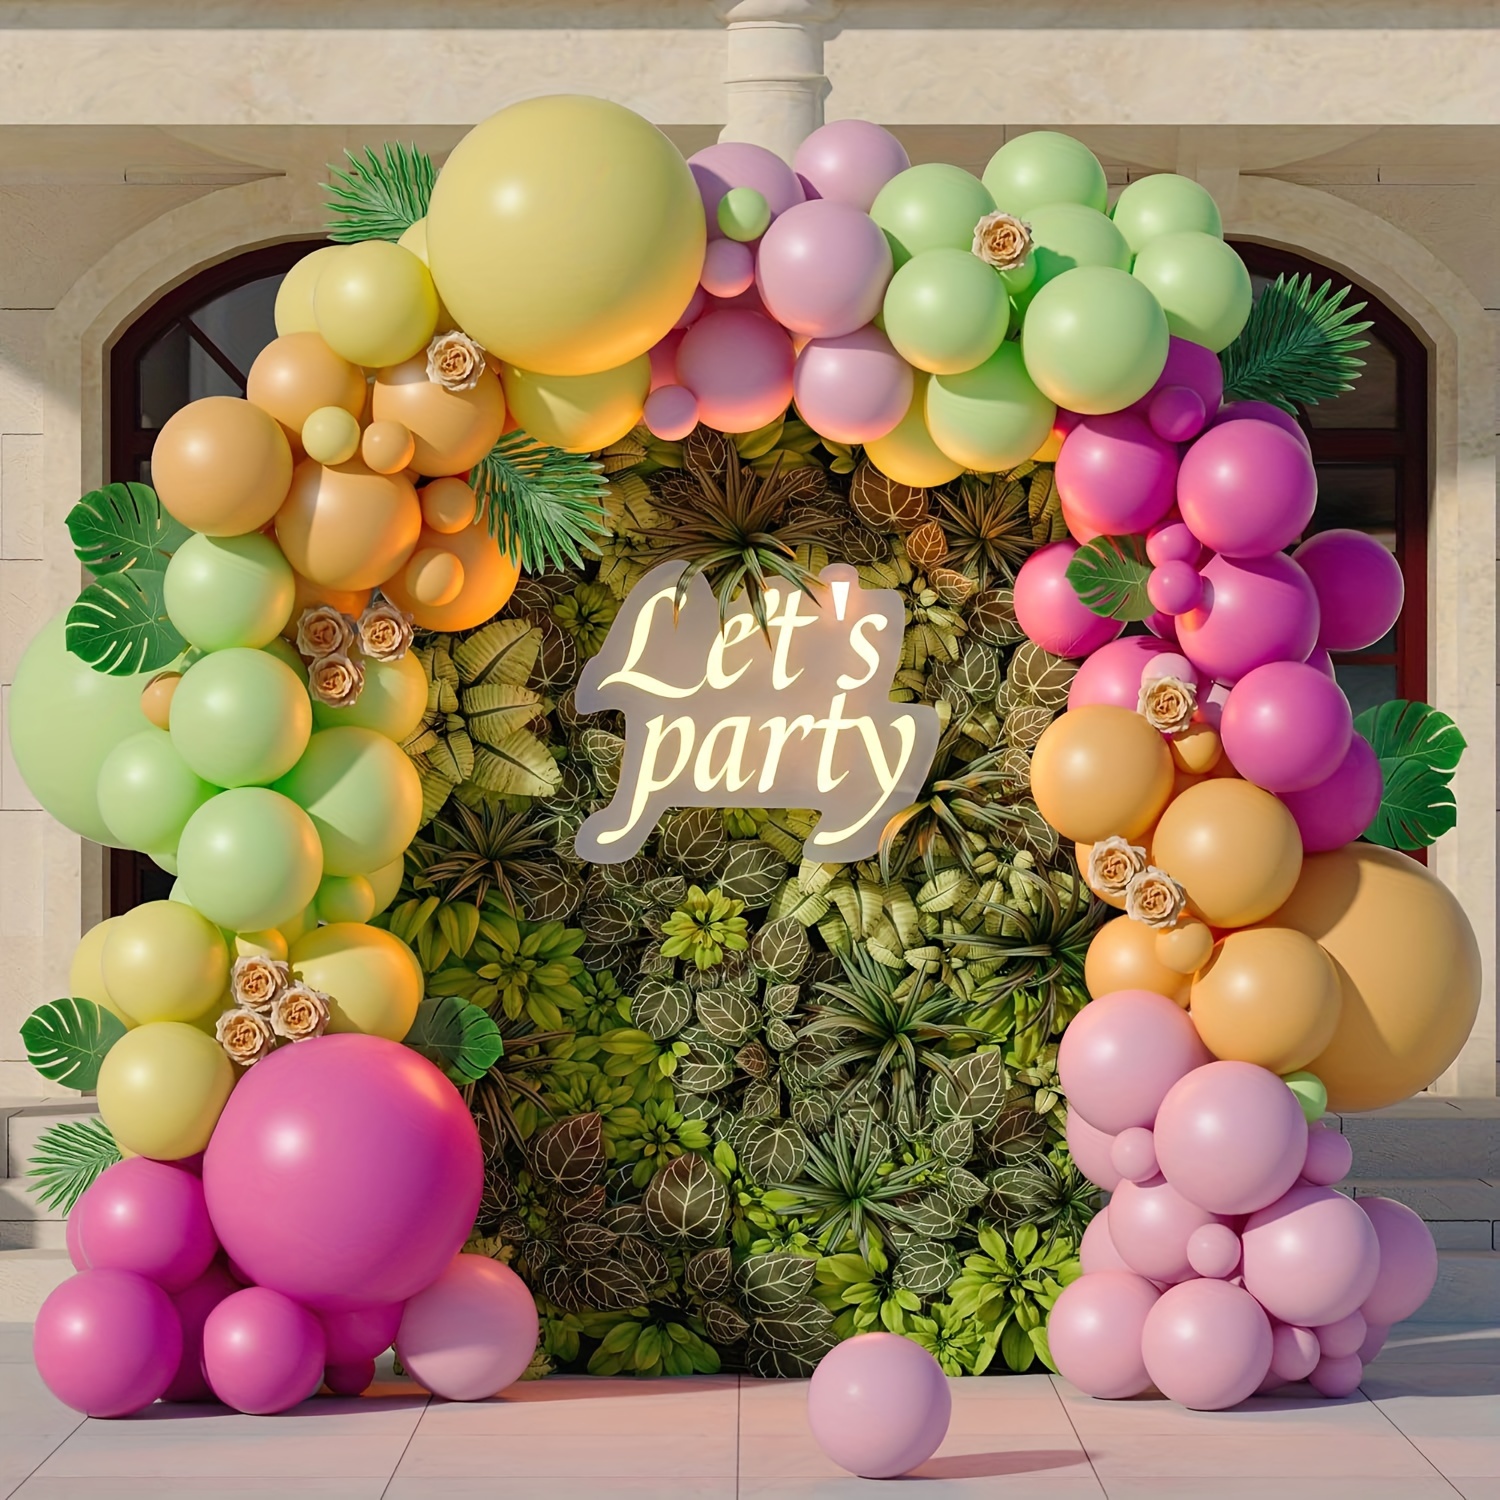 132pcs Hawaiian Themed Party Decorations Balloons Arch For Hawaiian Party  Decorations Tropical Themed Balloons Garland Kit For Tropical Party  Decorations, High-quality & Affordable